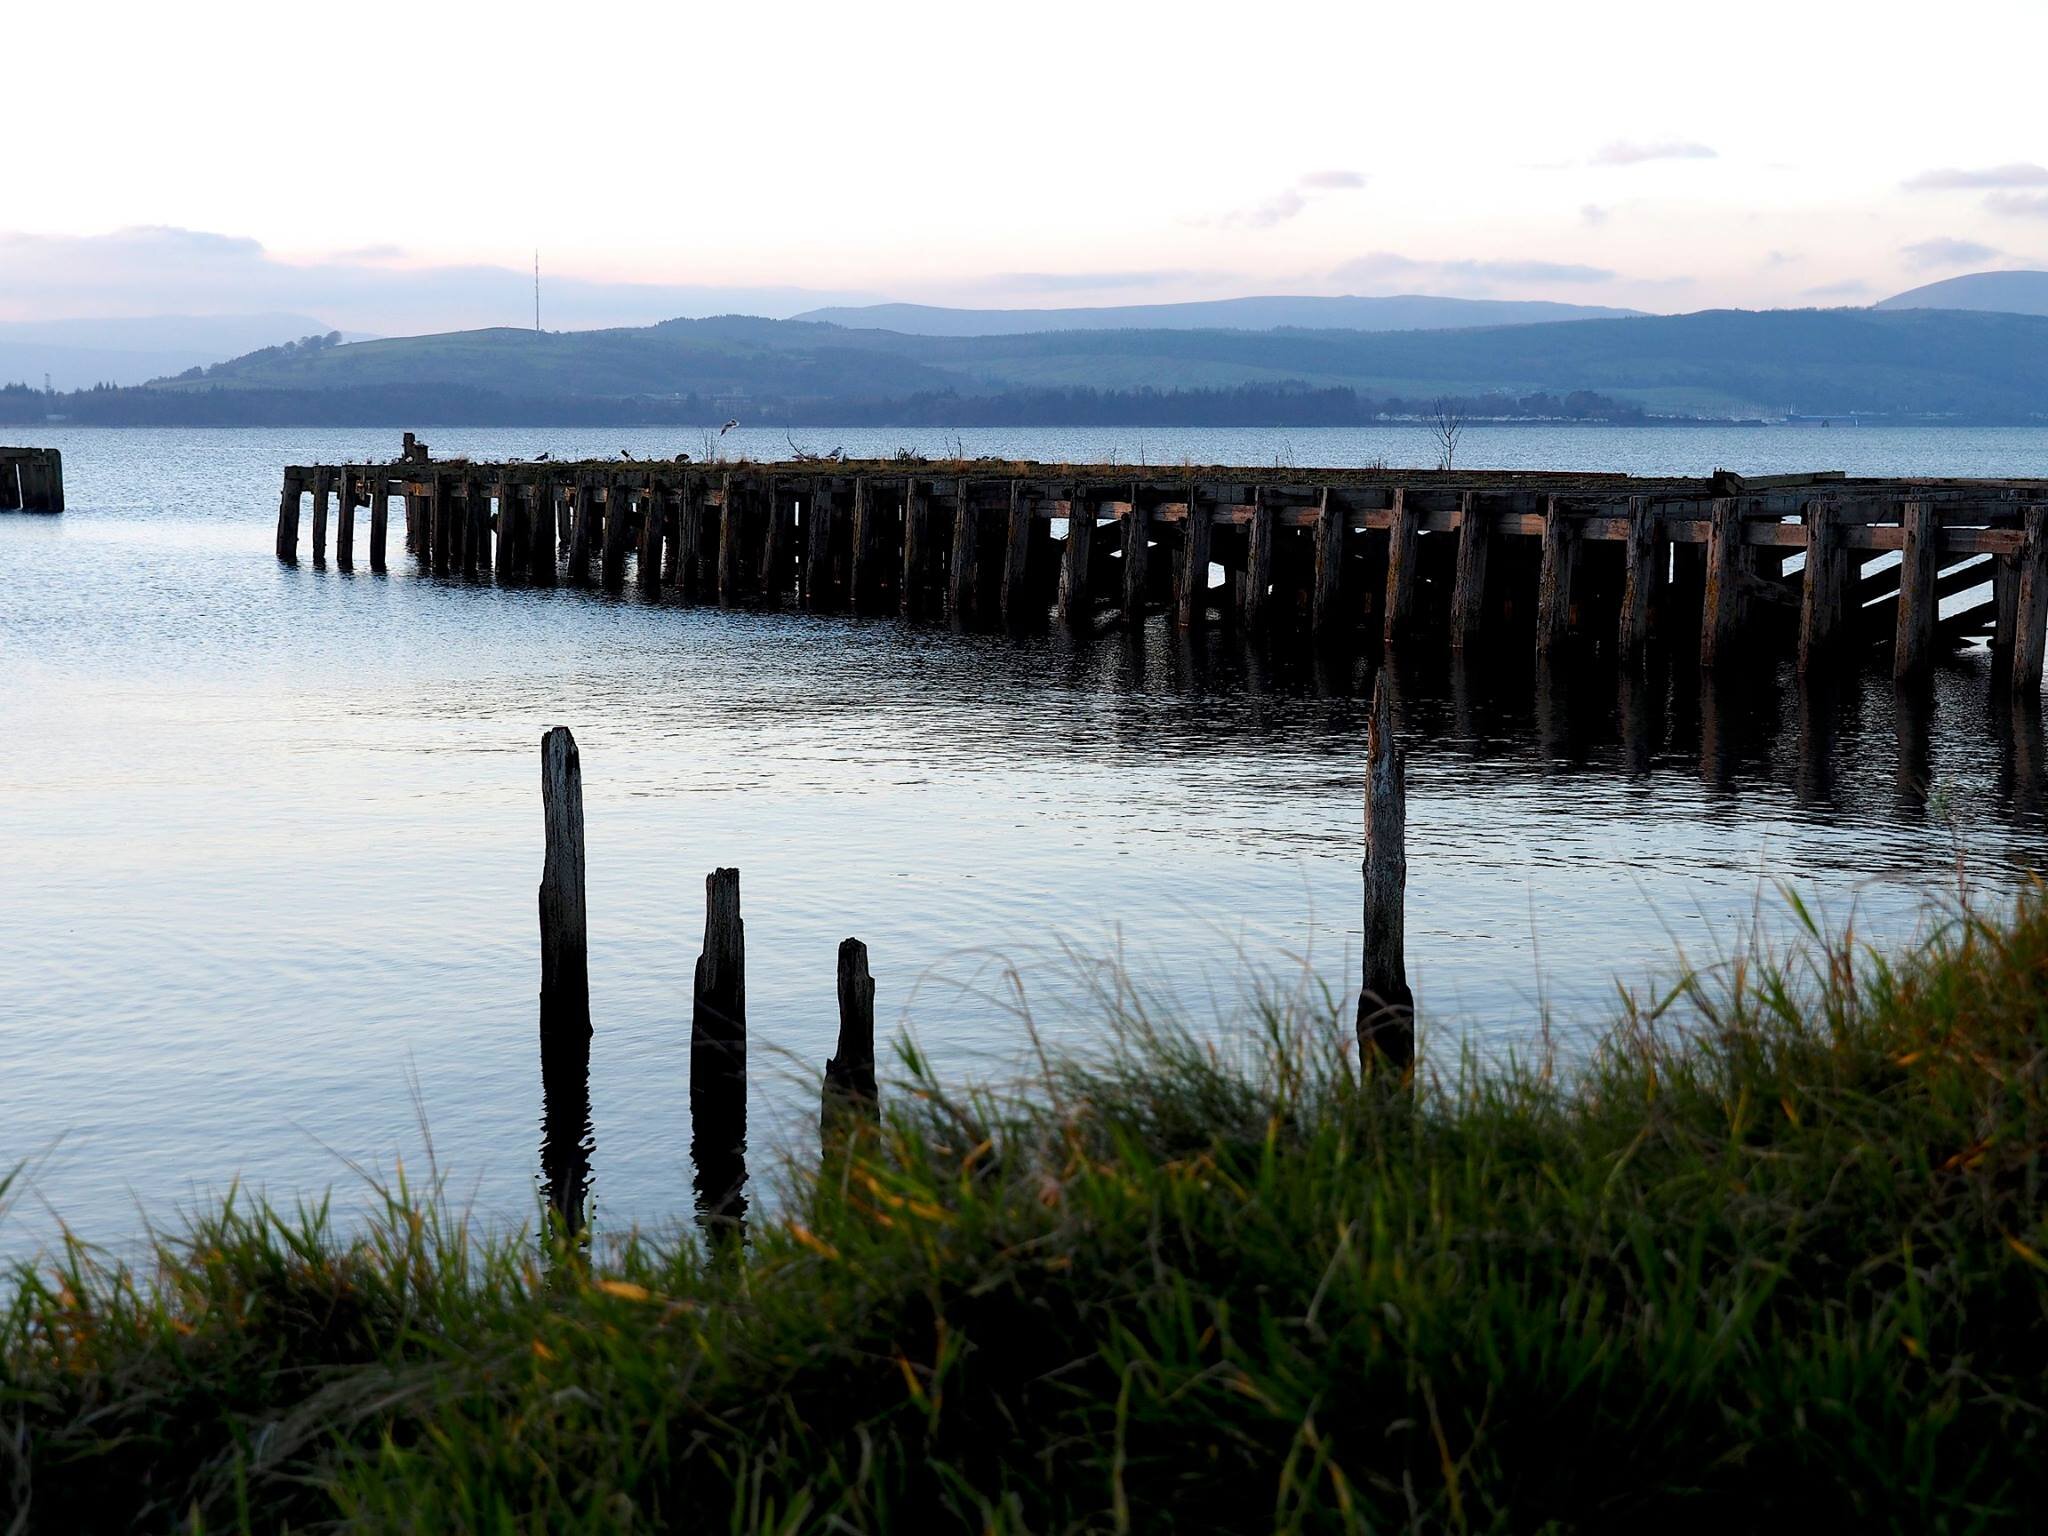 Helensburgh, Scotland. A hidden gem in the Scottish highlands. An old doc along the River Clyde.